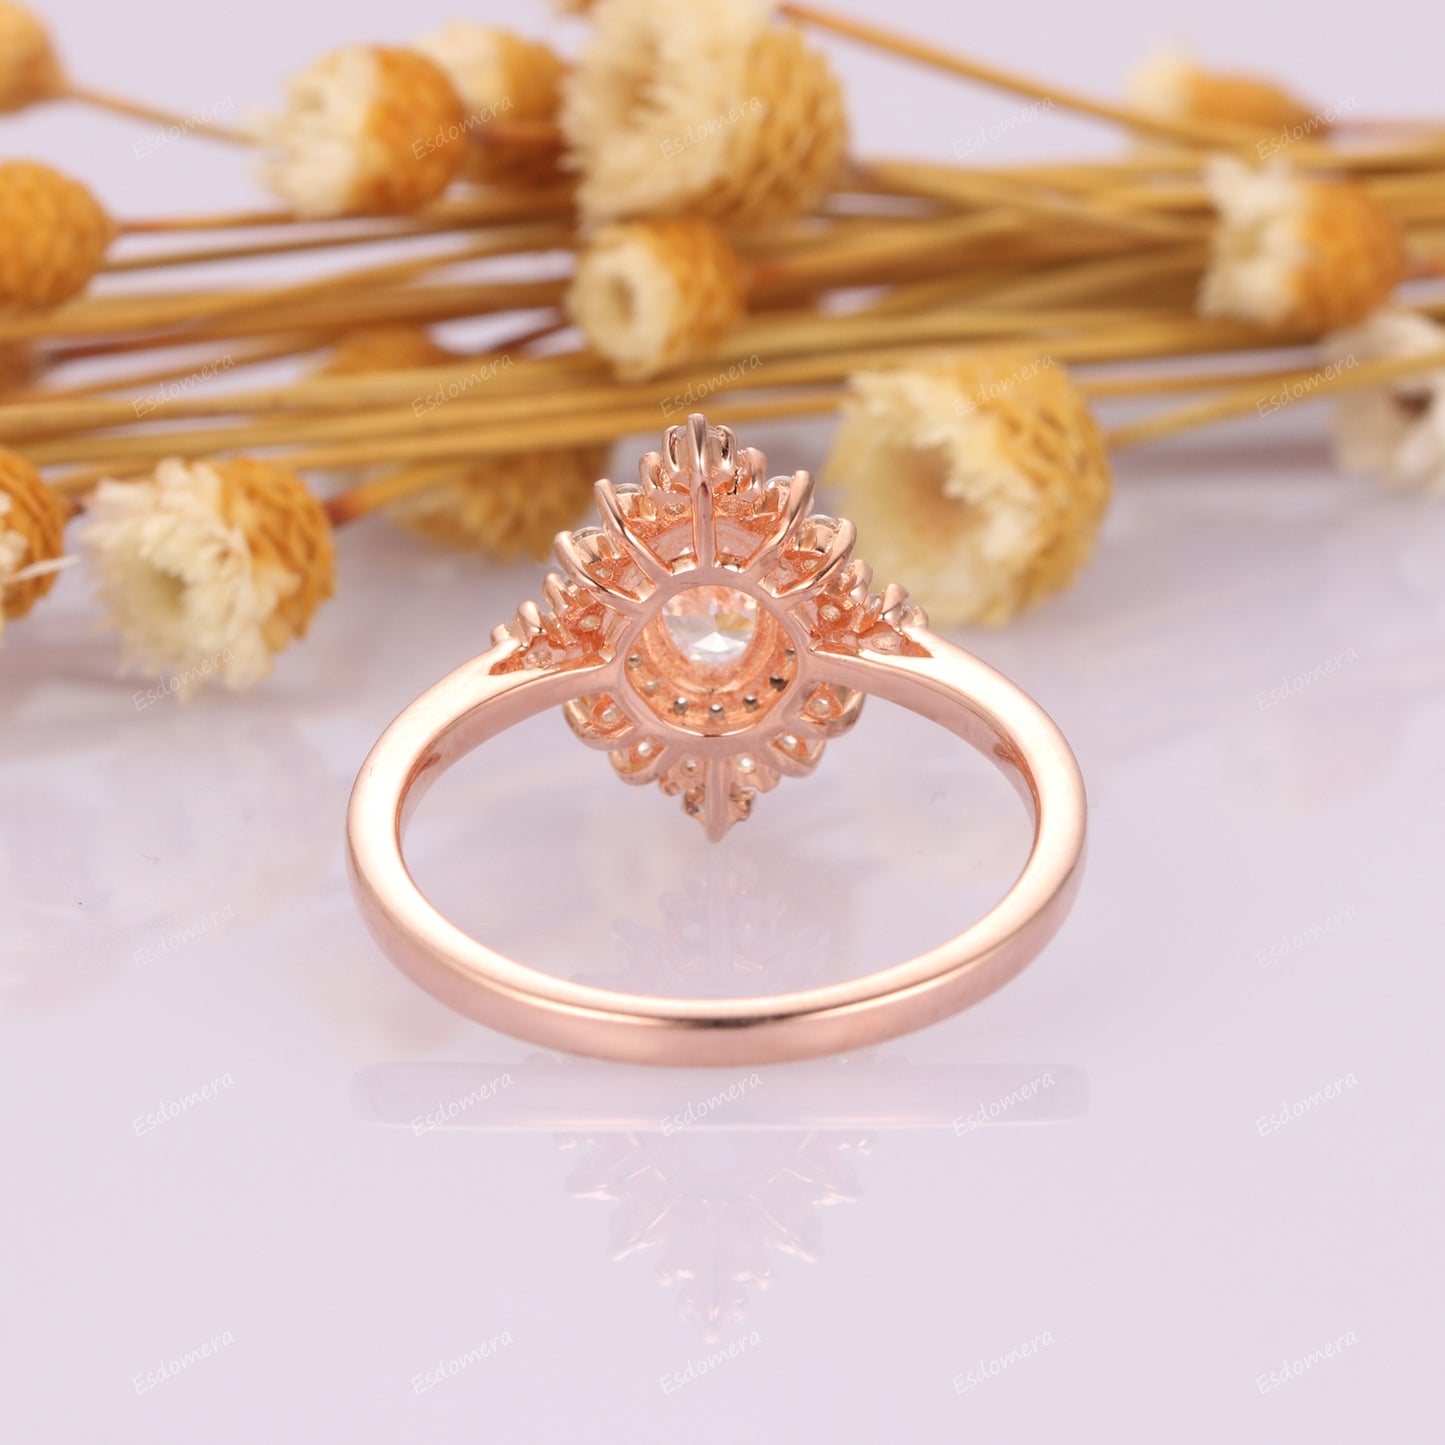 4x6mm Oval Cut Moissanite Engagement Ring For Her, Art Deco Moissanites Halo Wedding Ring, 14k Rose Gold Tapered Band Anniversary Ring For Women